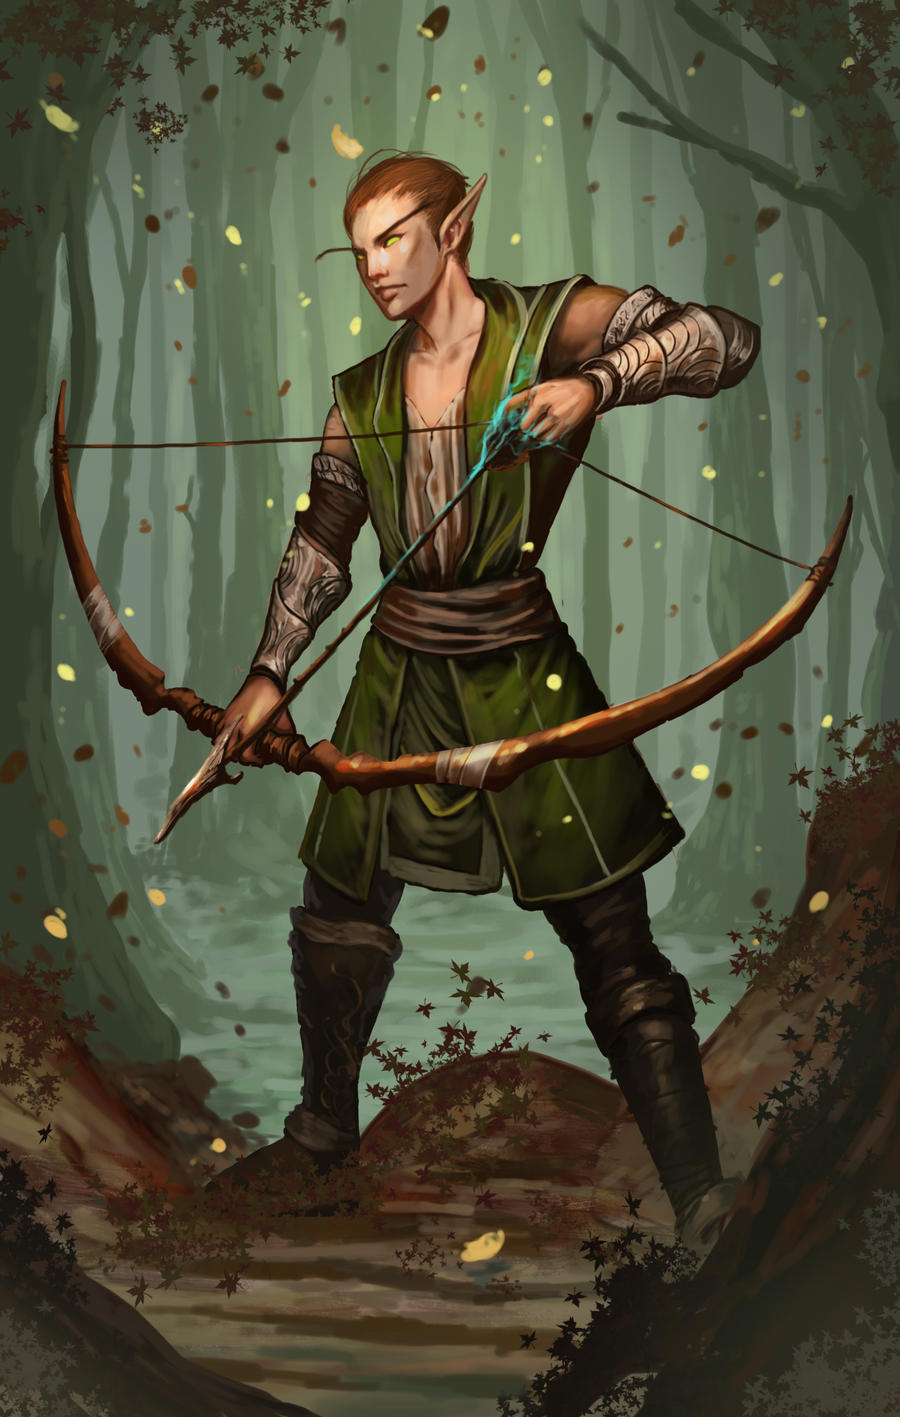 Wood-elf drawing a bow back in the woods.